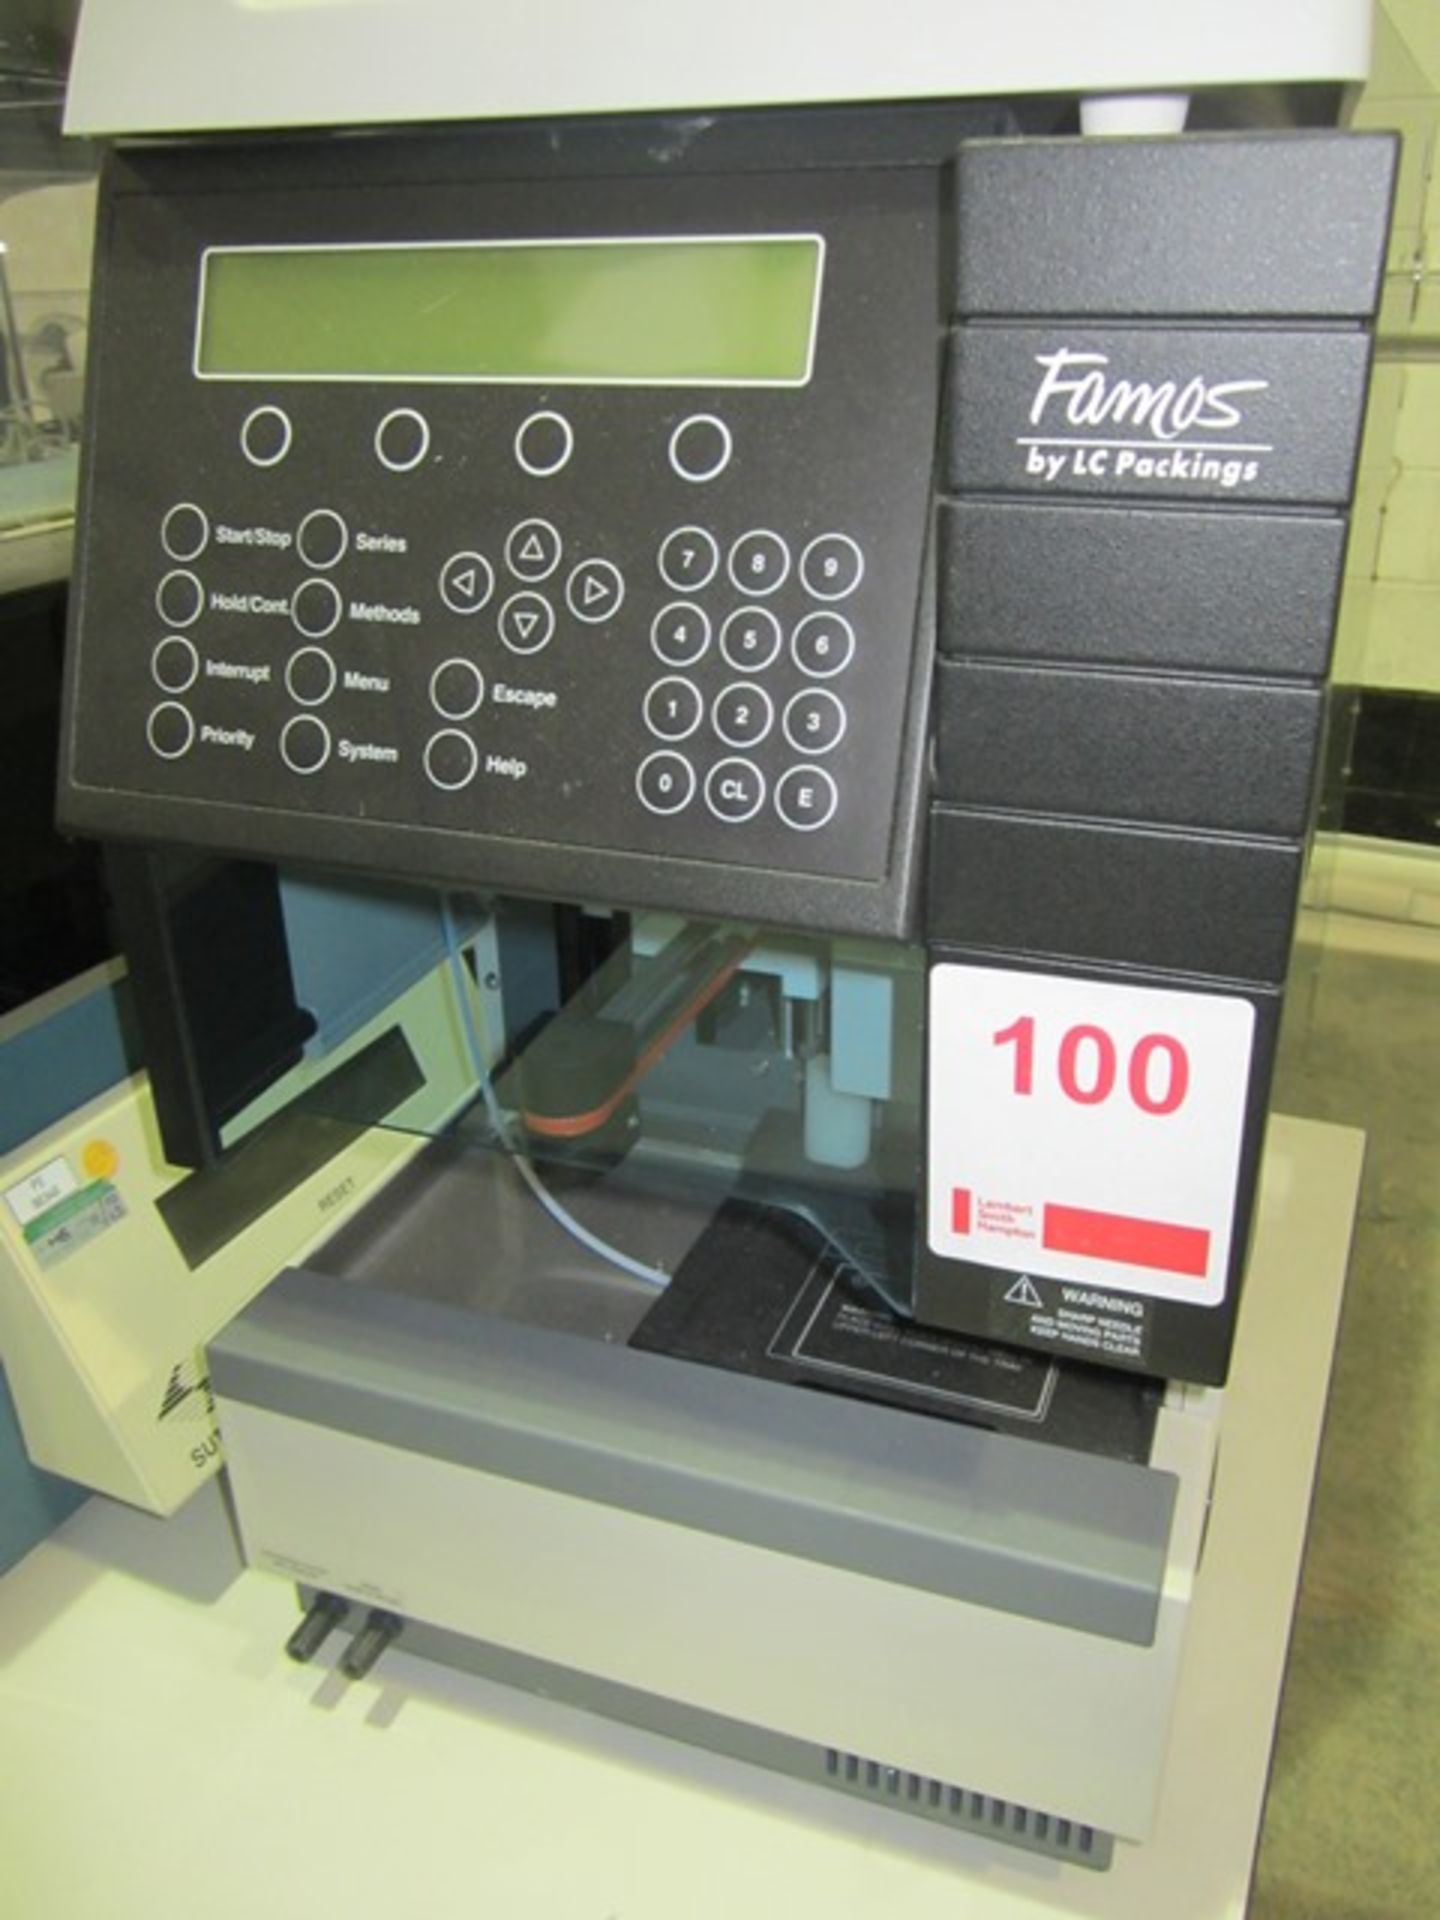 Dionex LC Packing Famos autosampler: STH585, UVD 340U, chromatography interface UC1-1000, P580